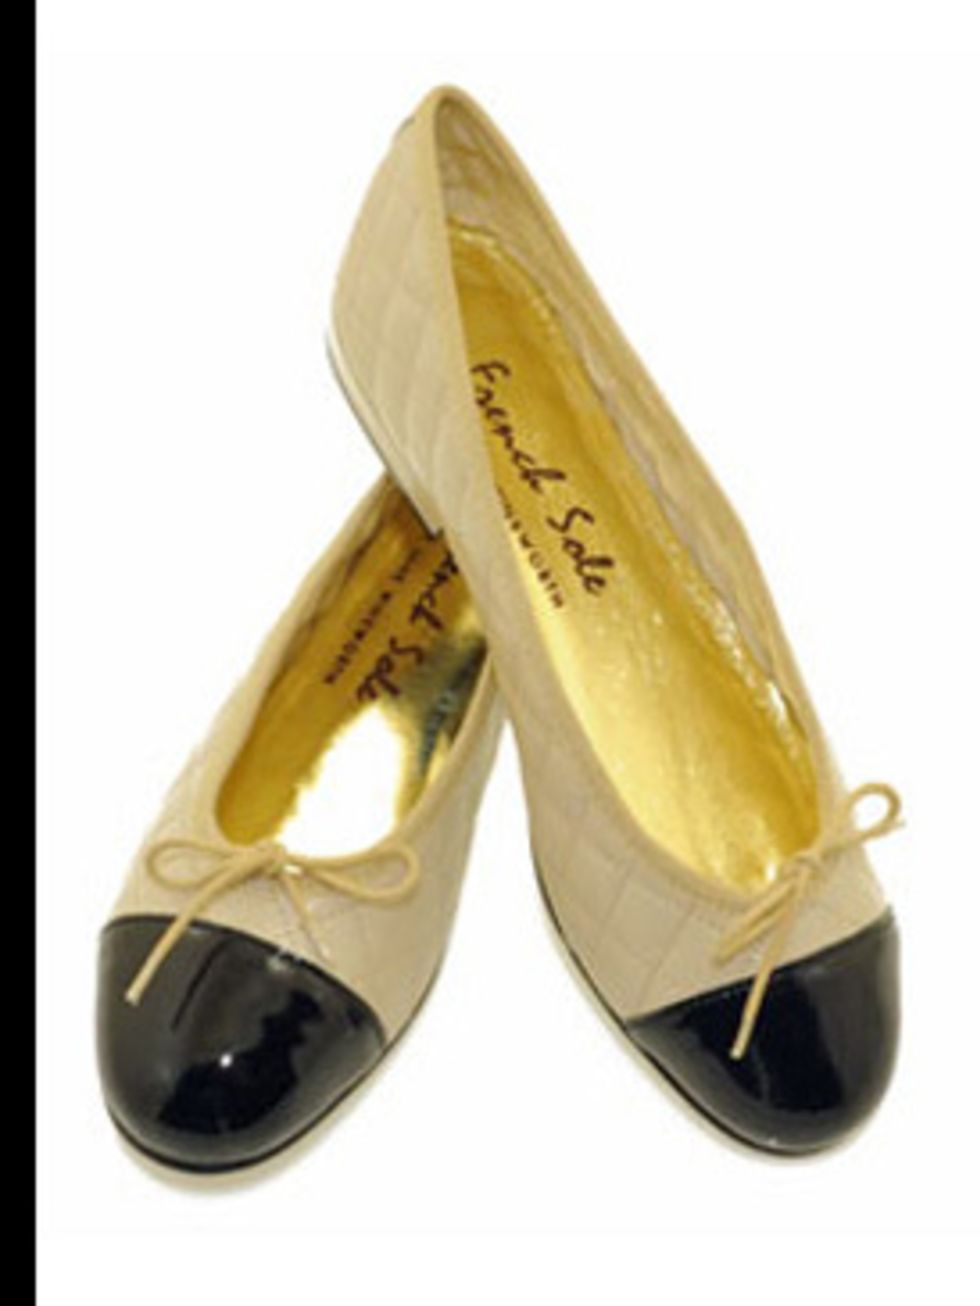 <p>Shoes, £70.00 by <a href="http://www.frenchsole.com/product_info.php?shoe_id=rtmAYYYHiuhdHPtJ">French Sole</a></p>